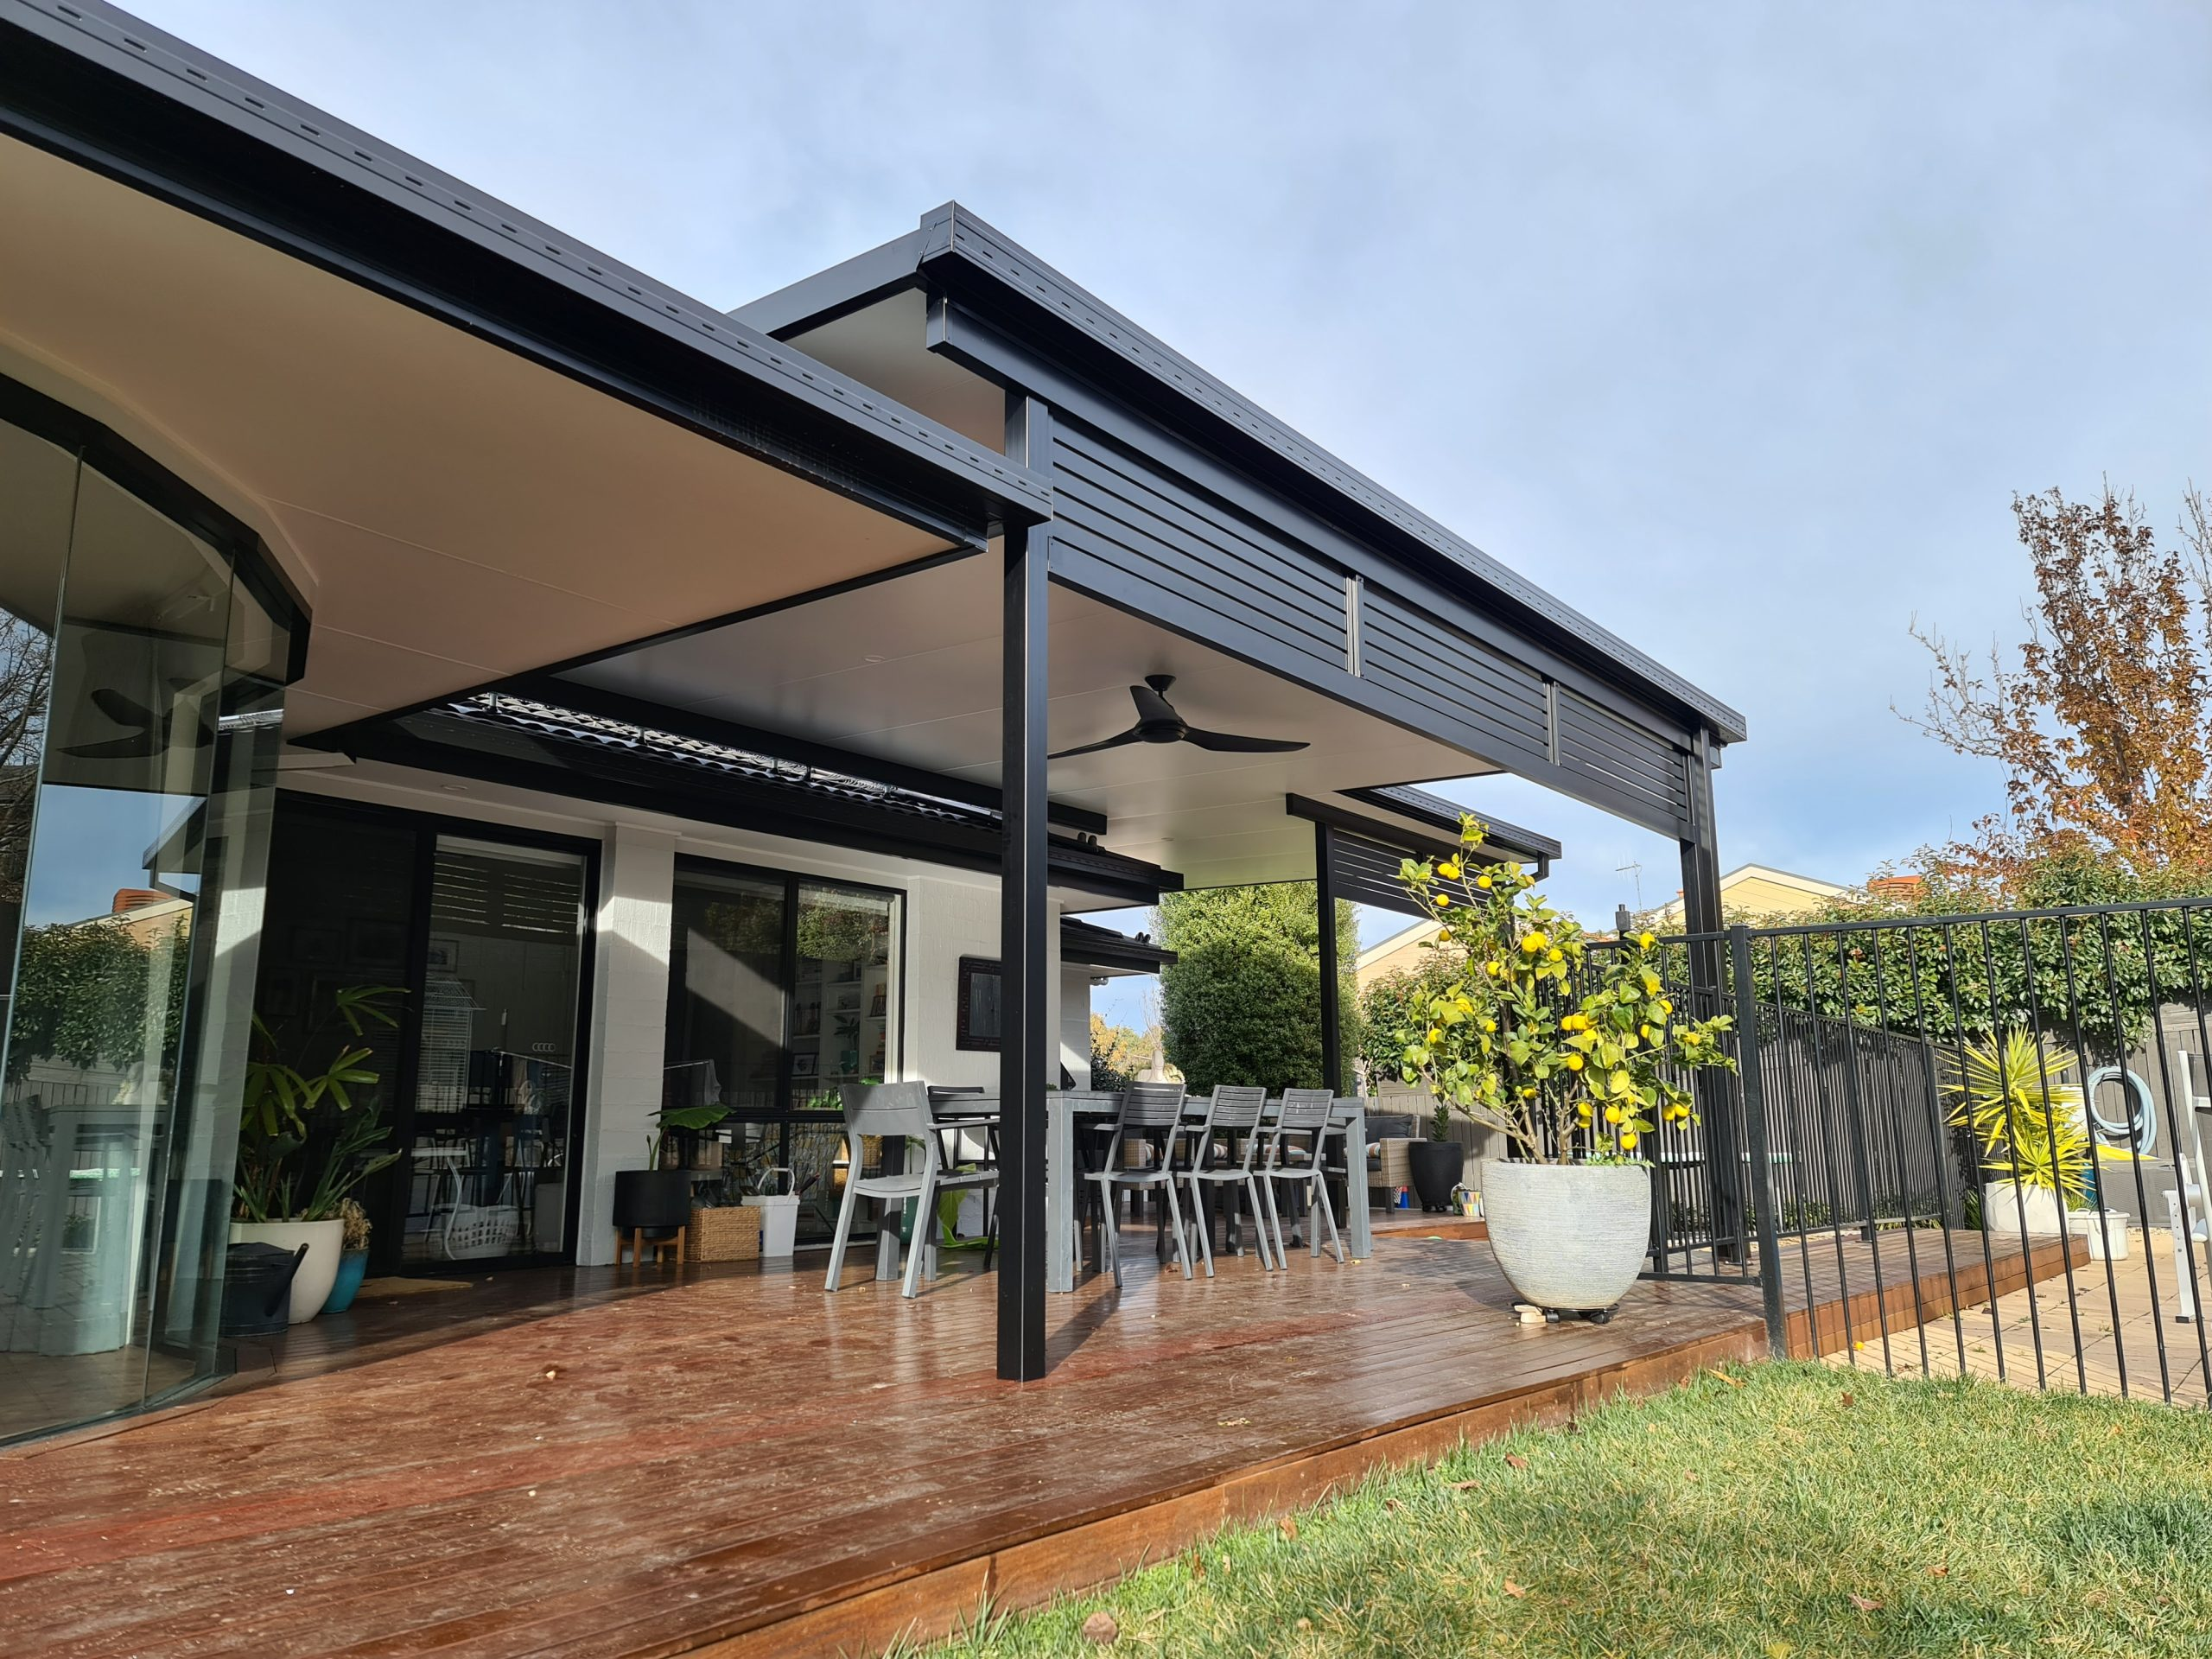 a home with an insulated roof and outdoor dining area.